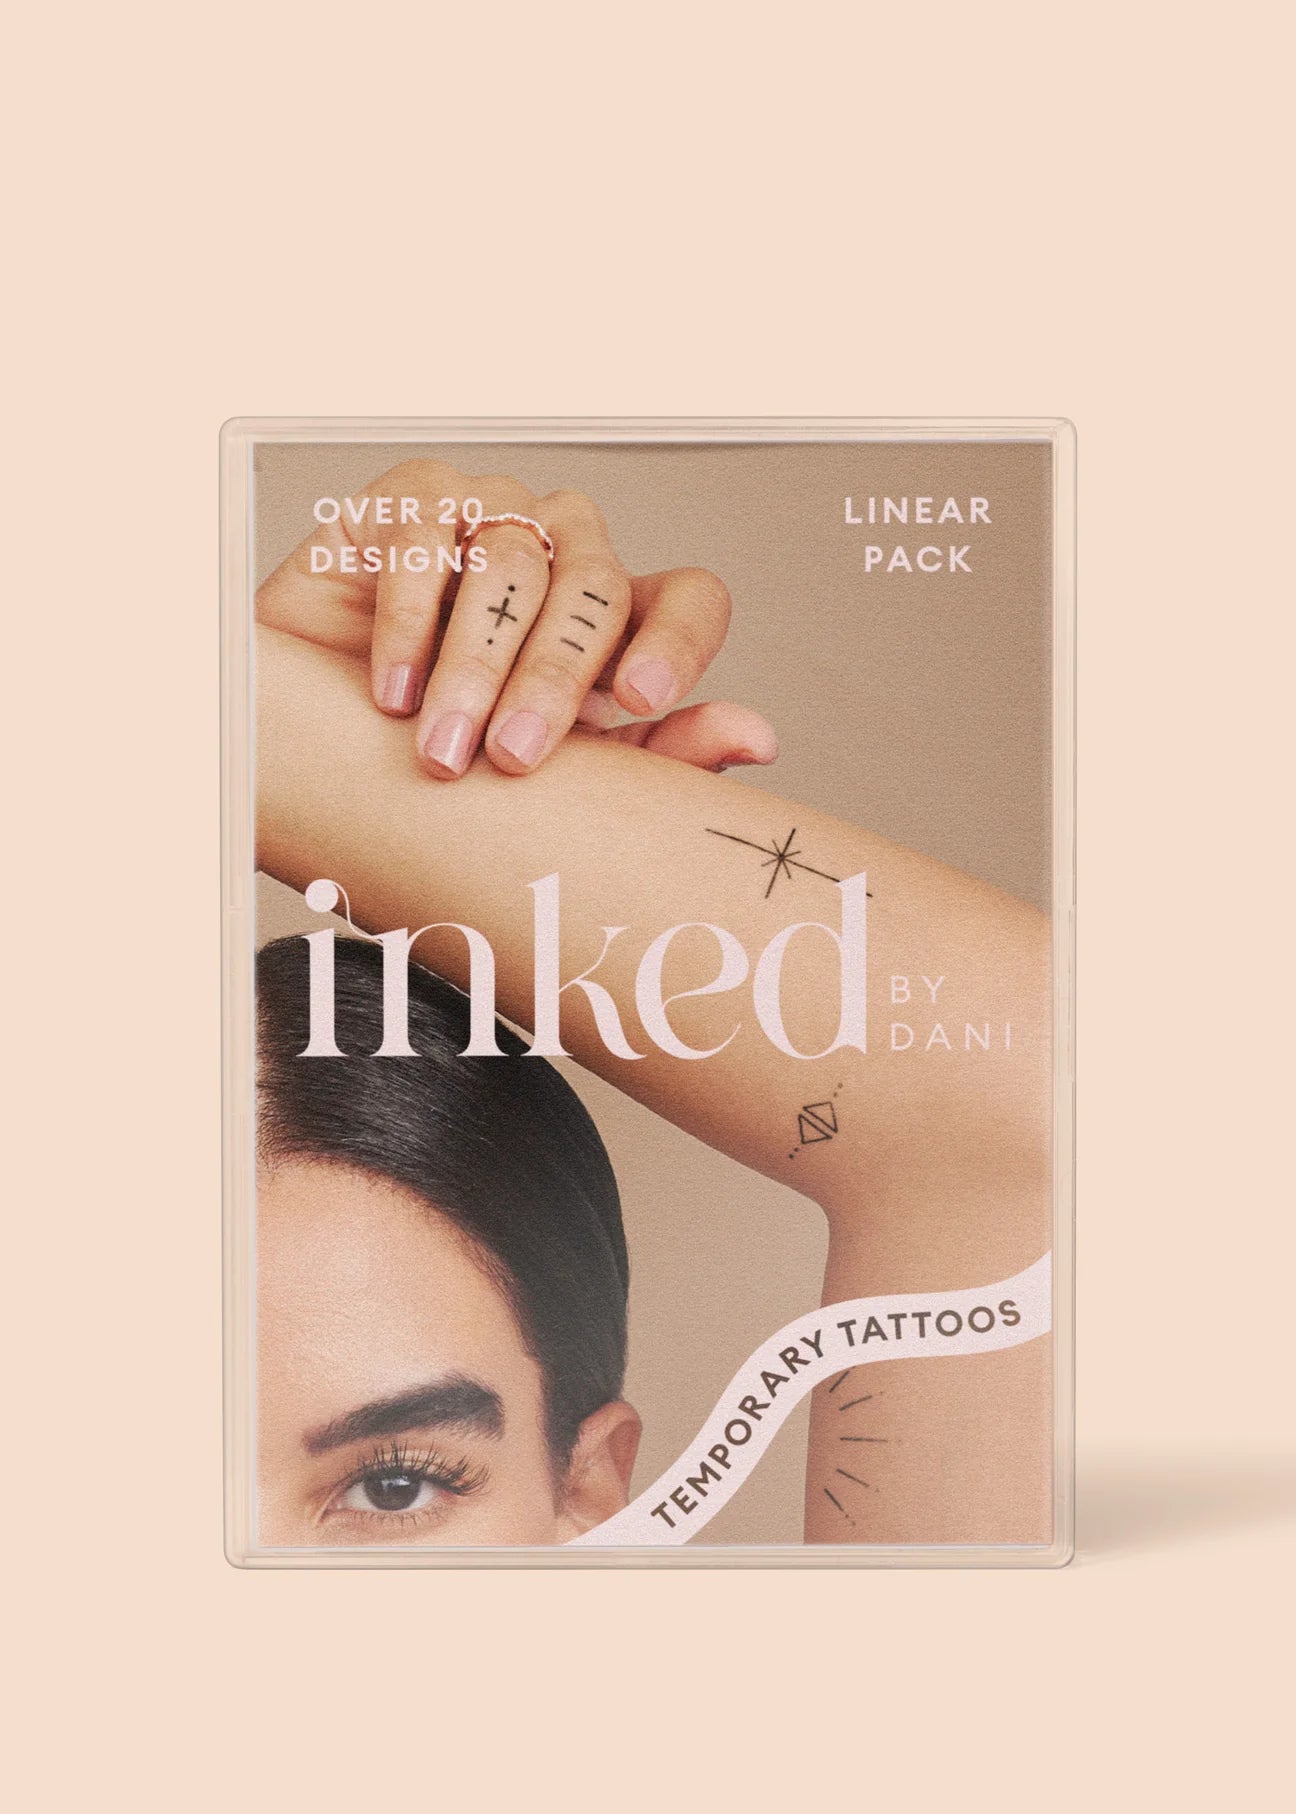 Inked by Dani - Linear Pack - Temporary Tattoos